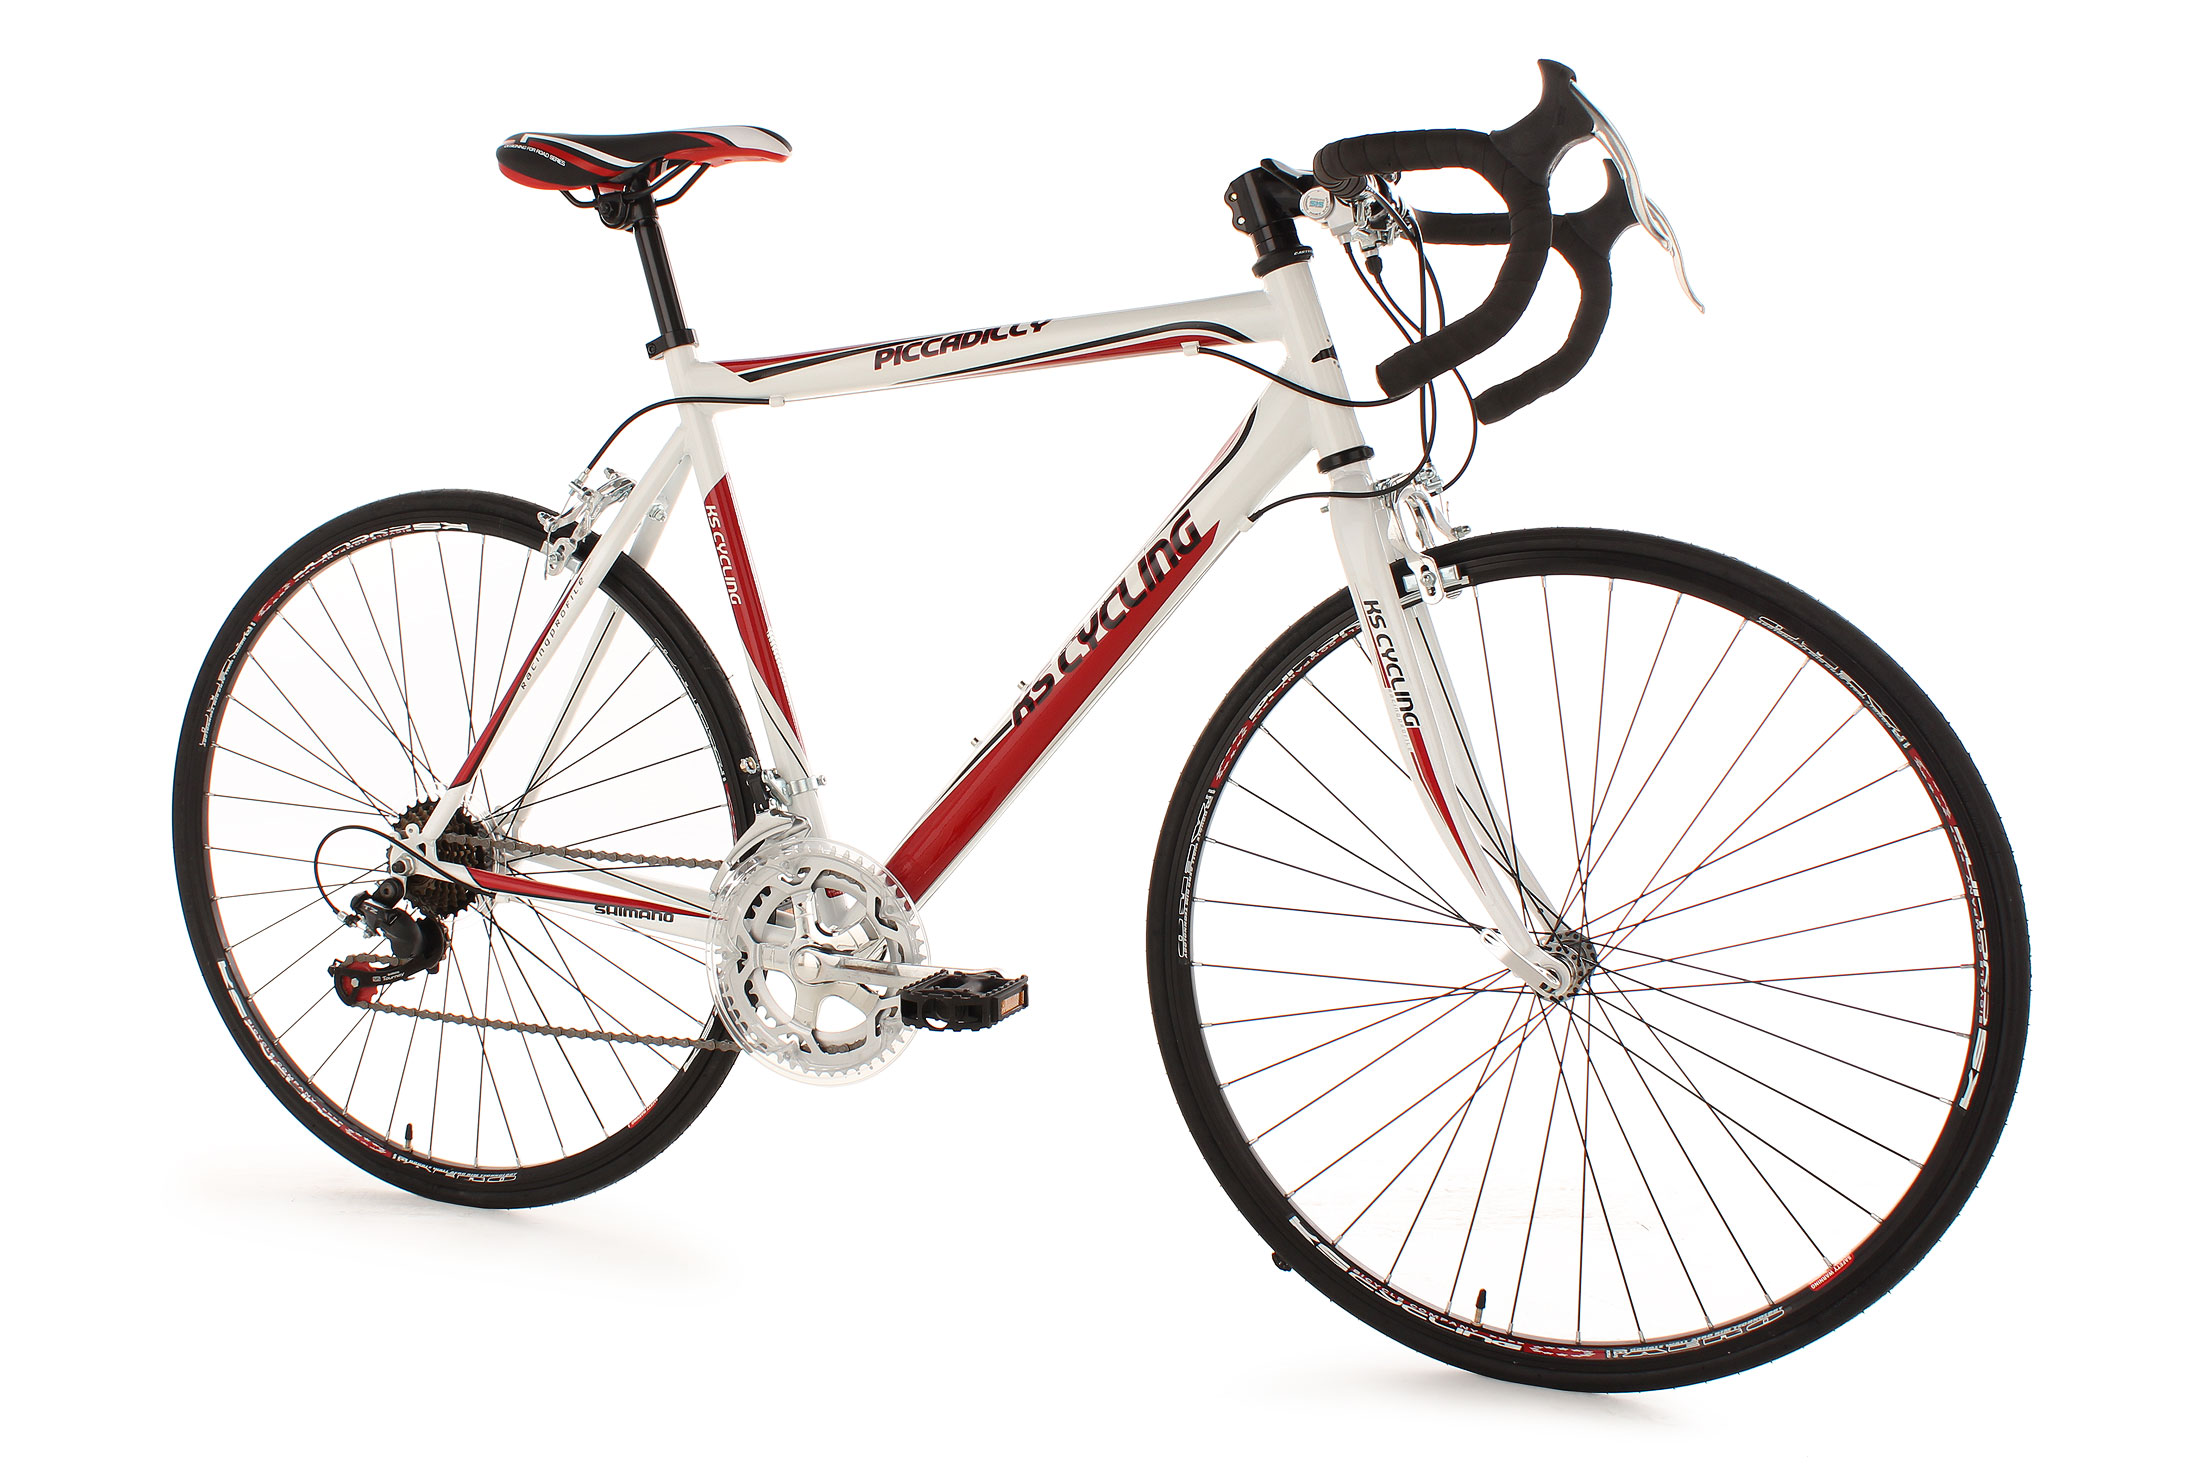 One Day Price - 28 inch racefiets Piccadilly i.s.m bikedealer.nl